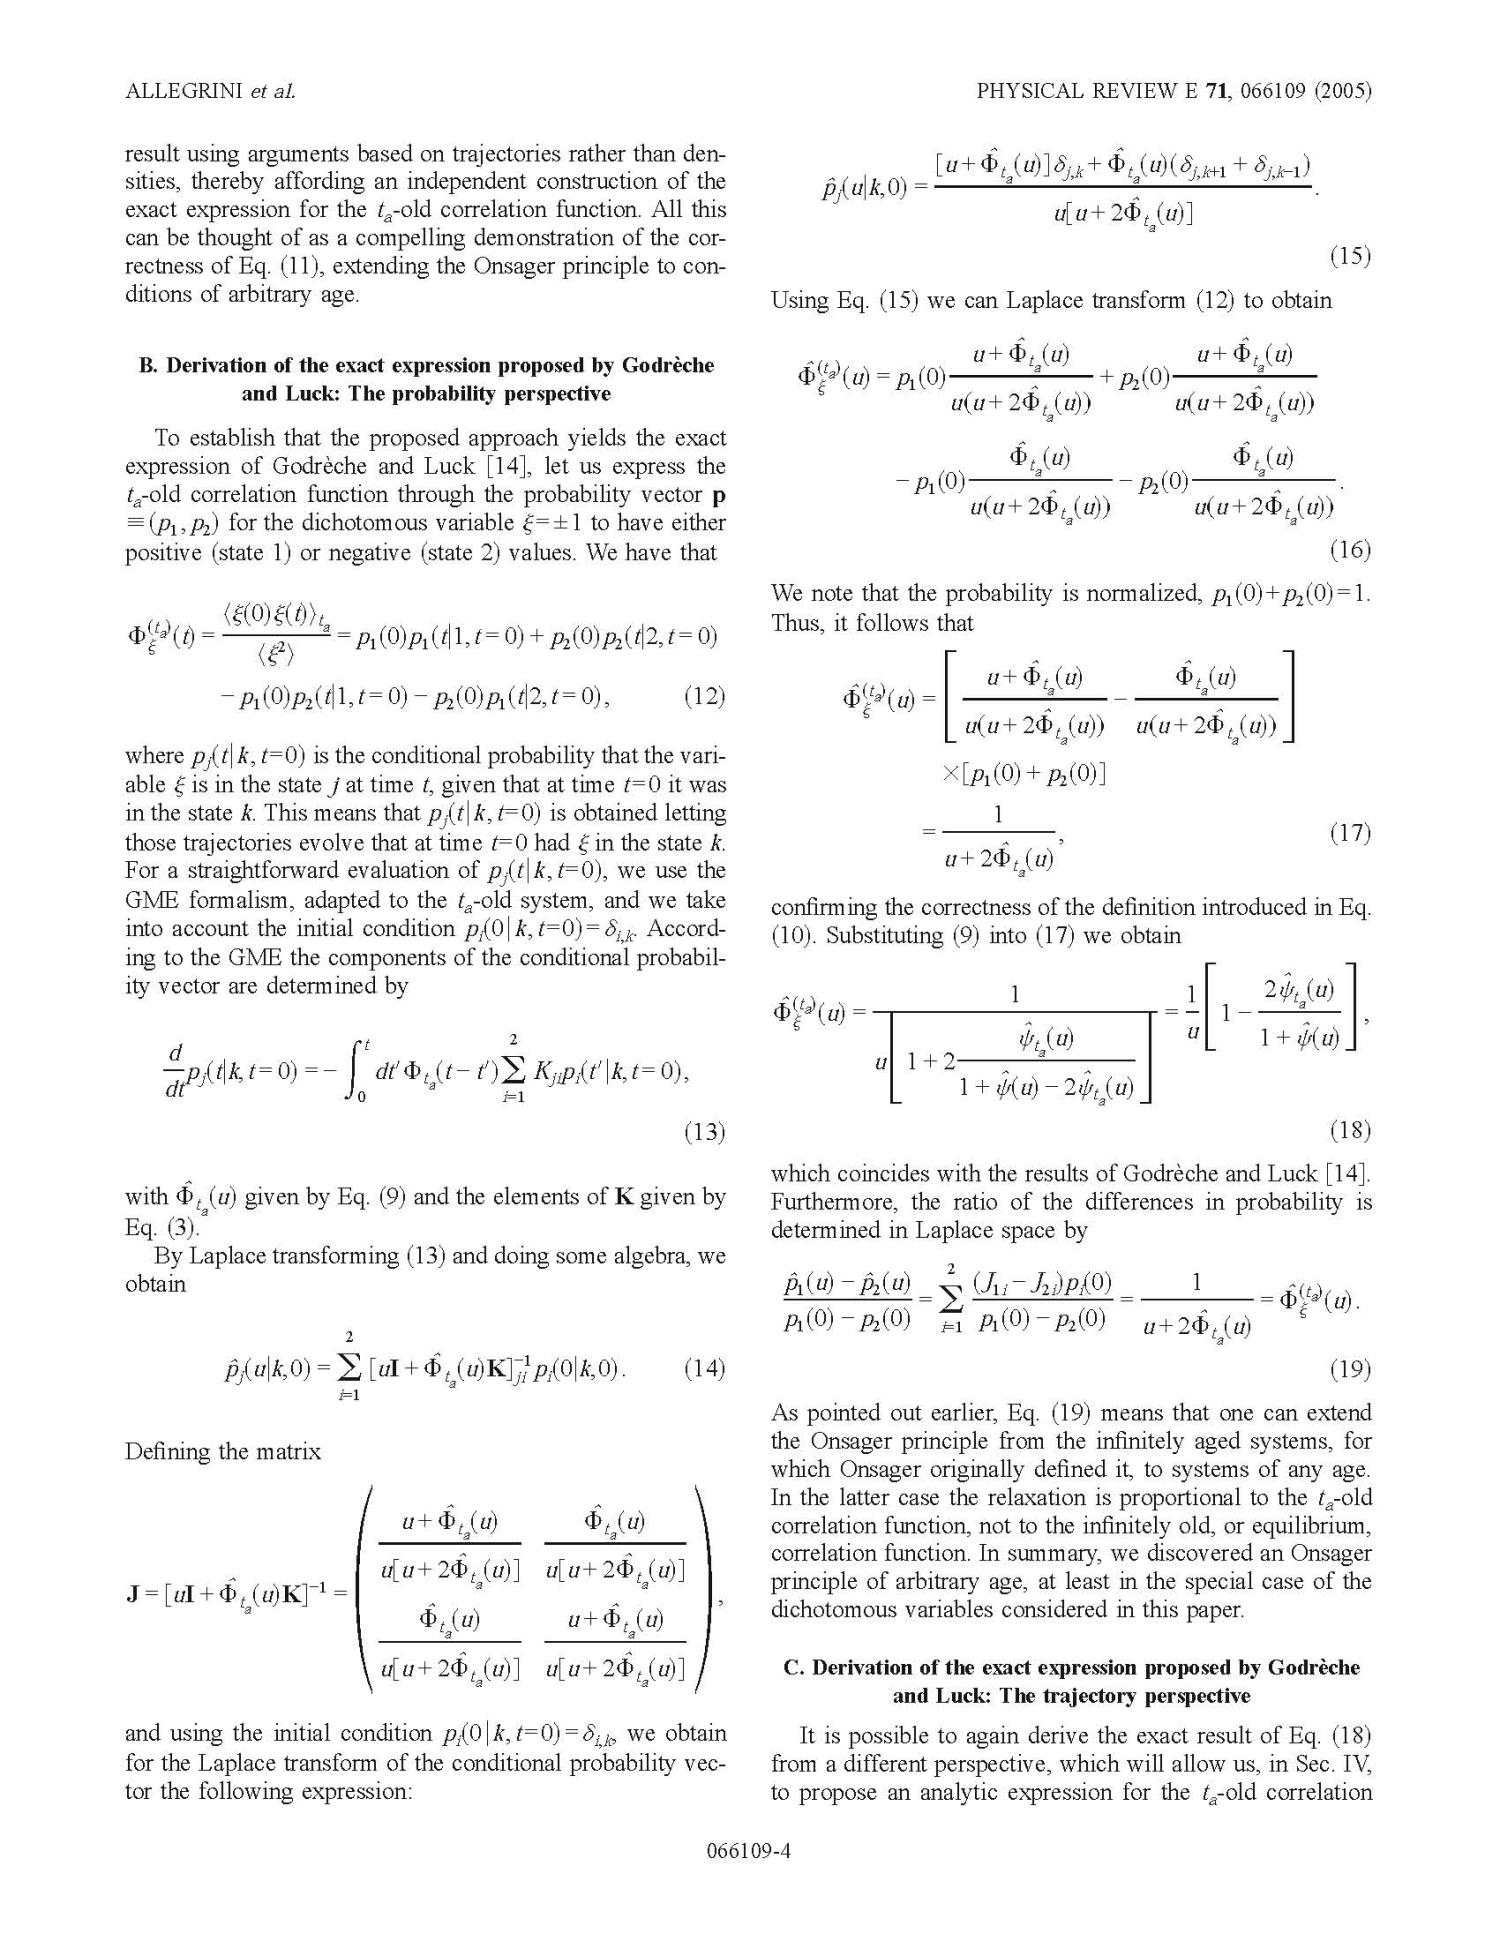 Correlation Function and Generalized Master Equation of Arbitrary Age
                                                
                                                    4
                                                